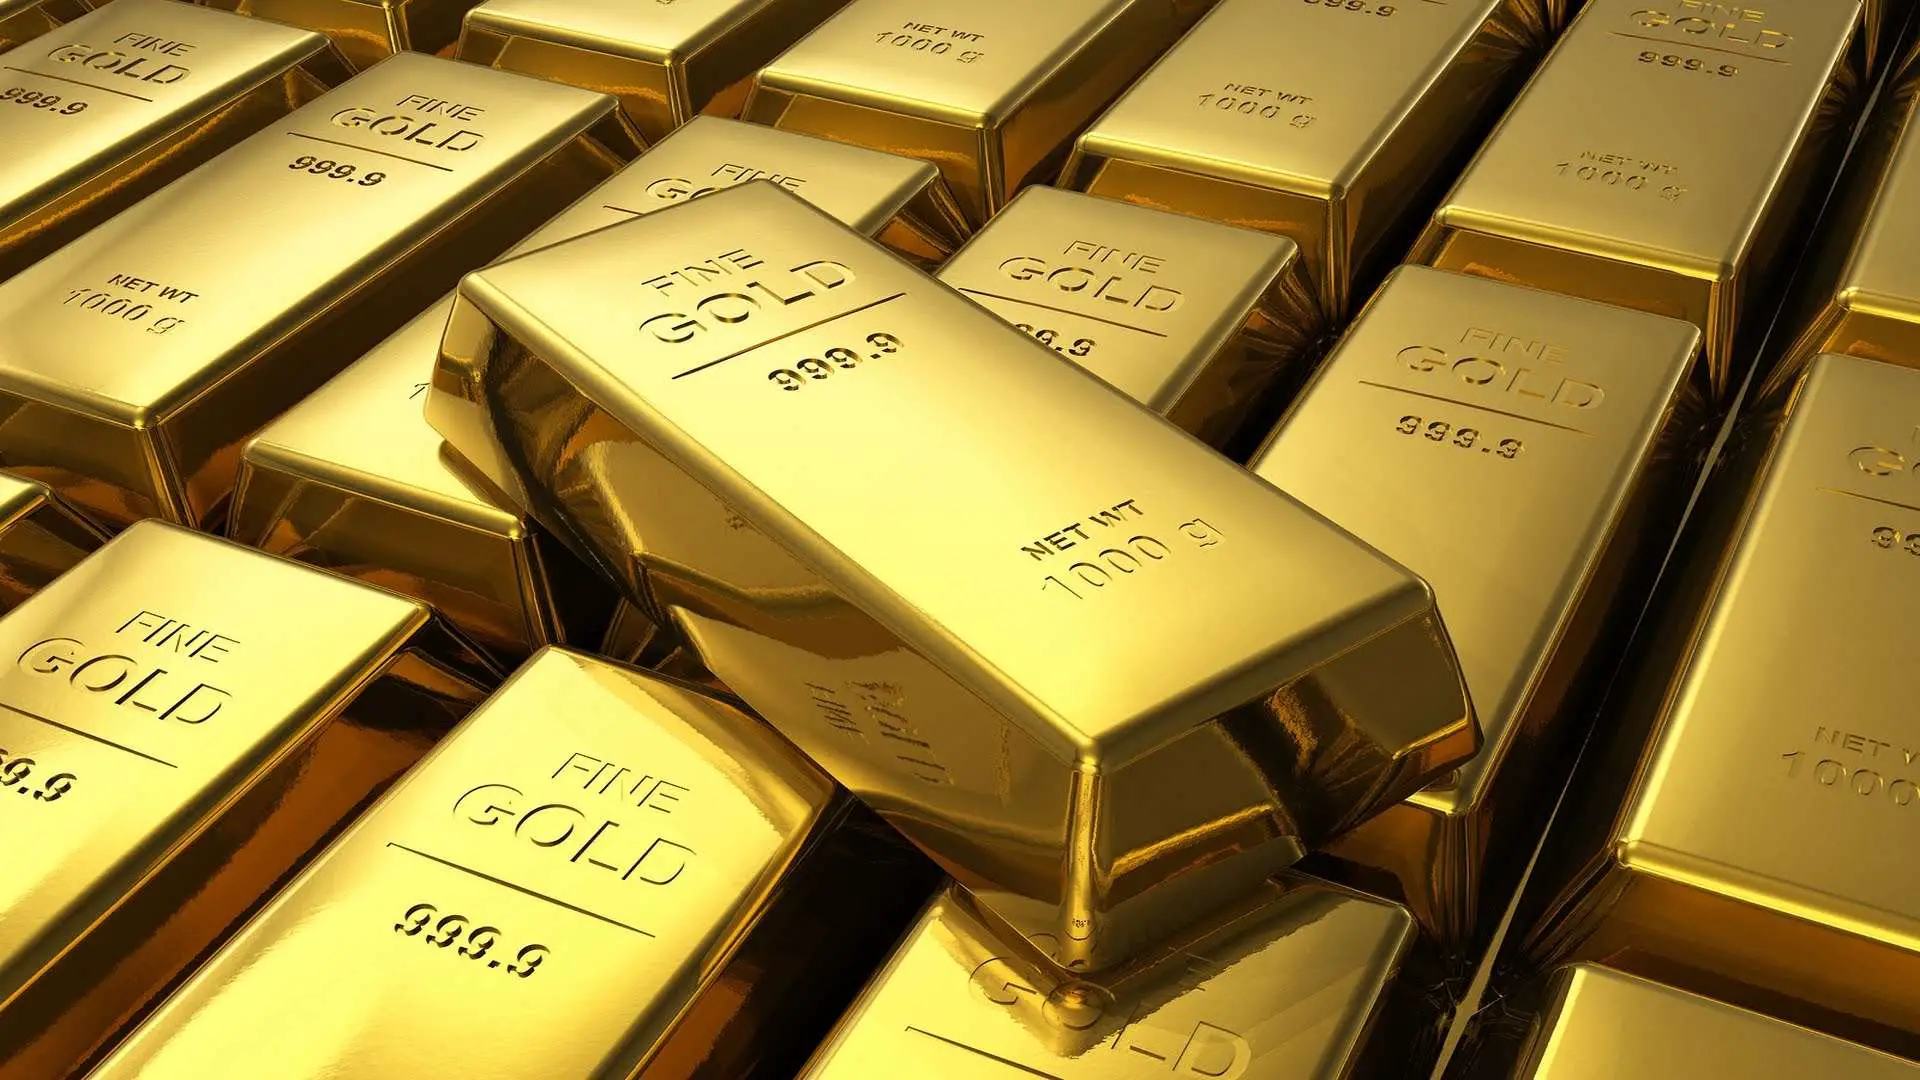 How much does a brick of gold cost, ONETTECHNOLOGIESINDIA.COM